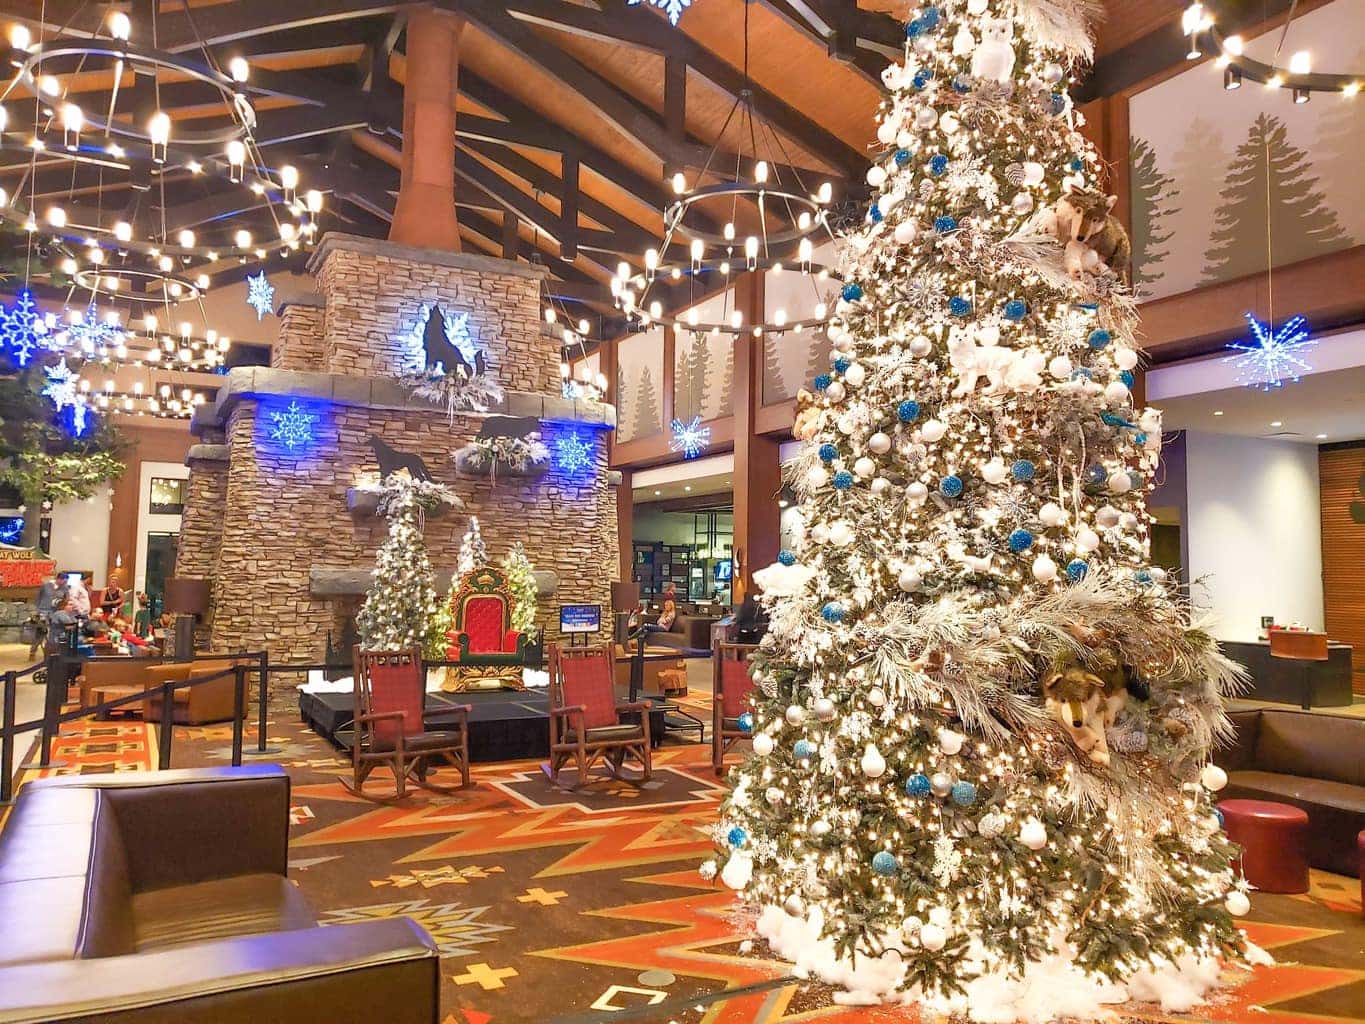 5 Howling Good Reasons to stay at the Great Wolf Lodge During the Holidays